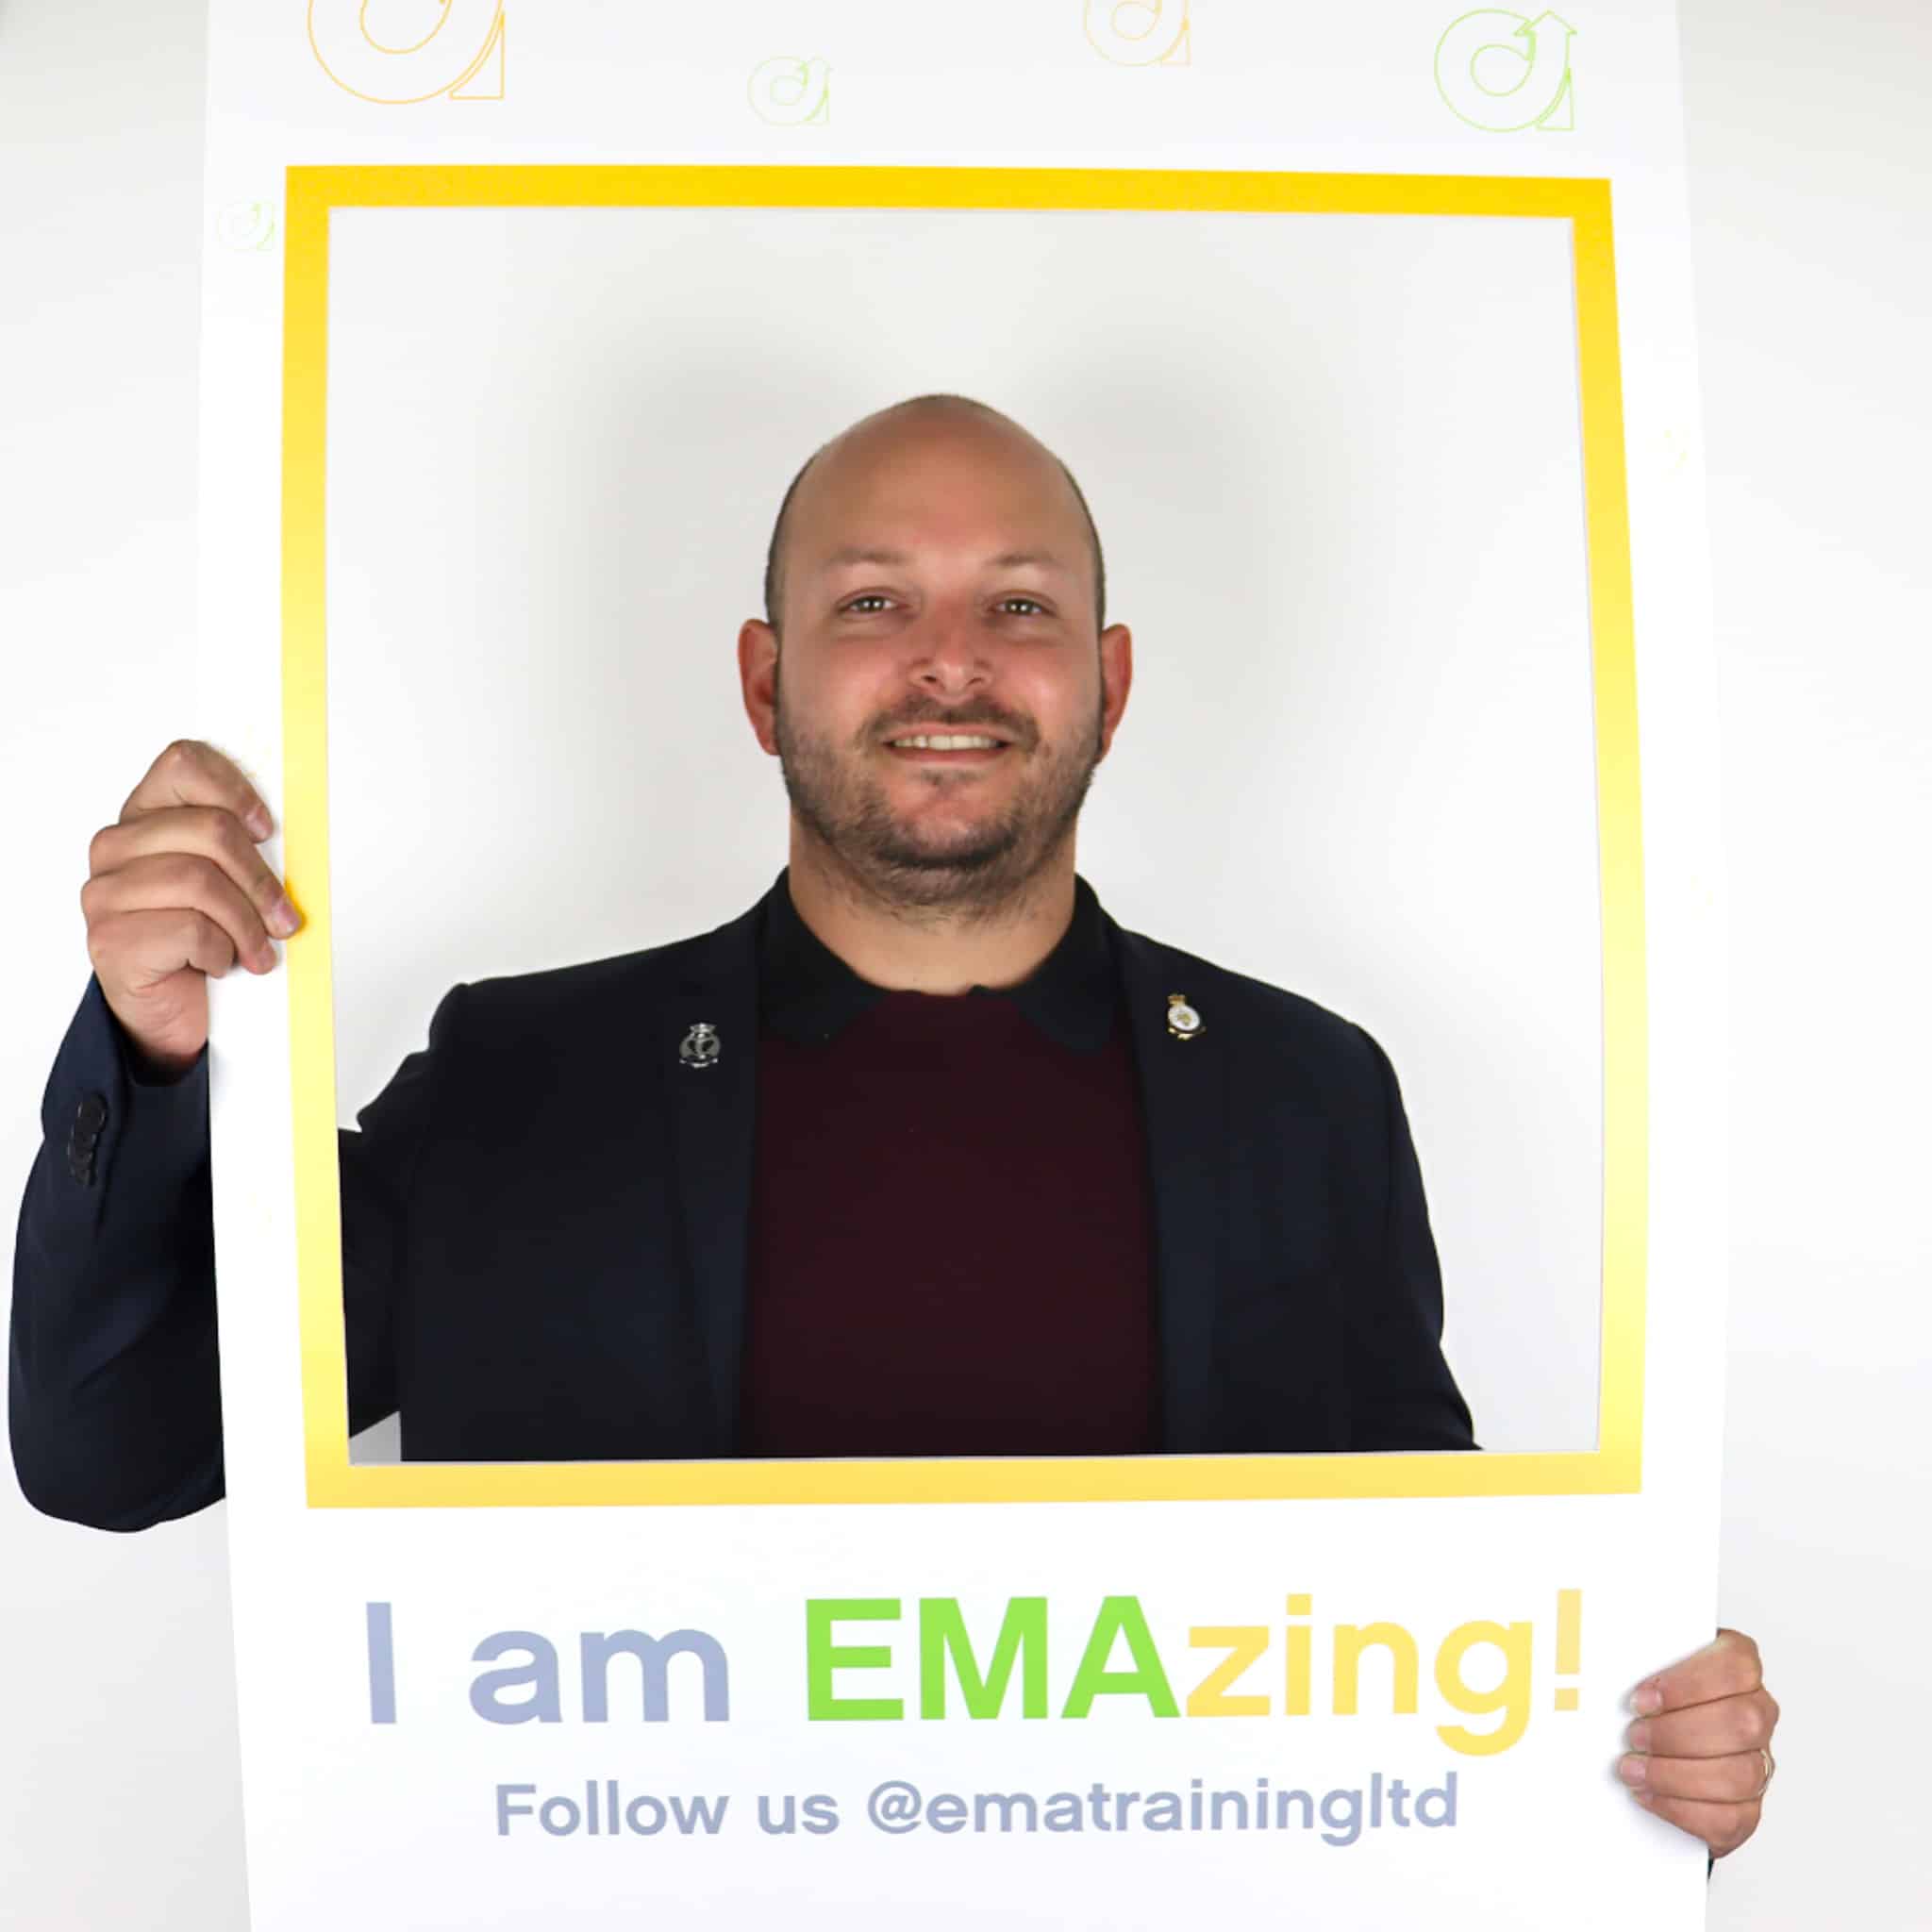 EMA's Accountancy Trainer, Mike, holding frame and smiling.